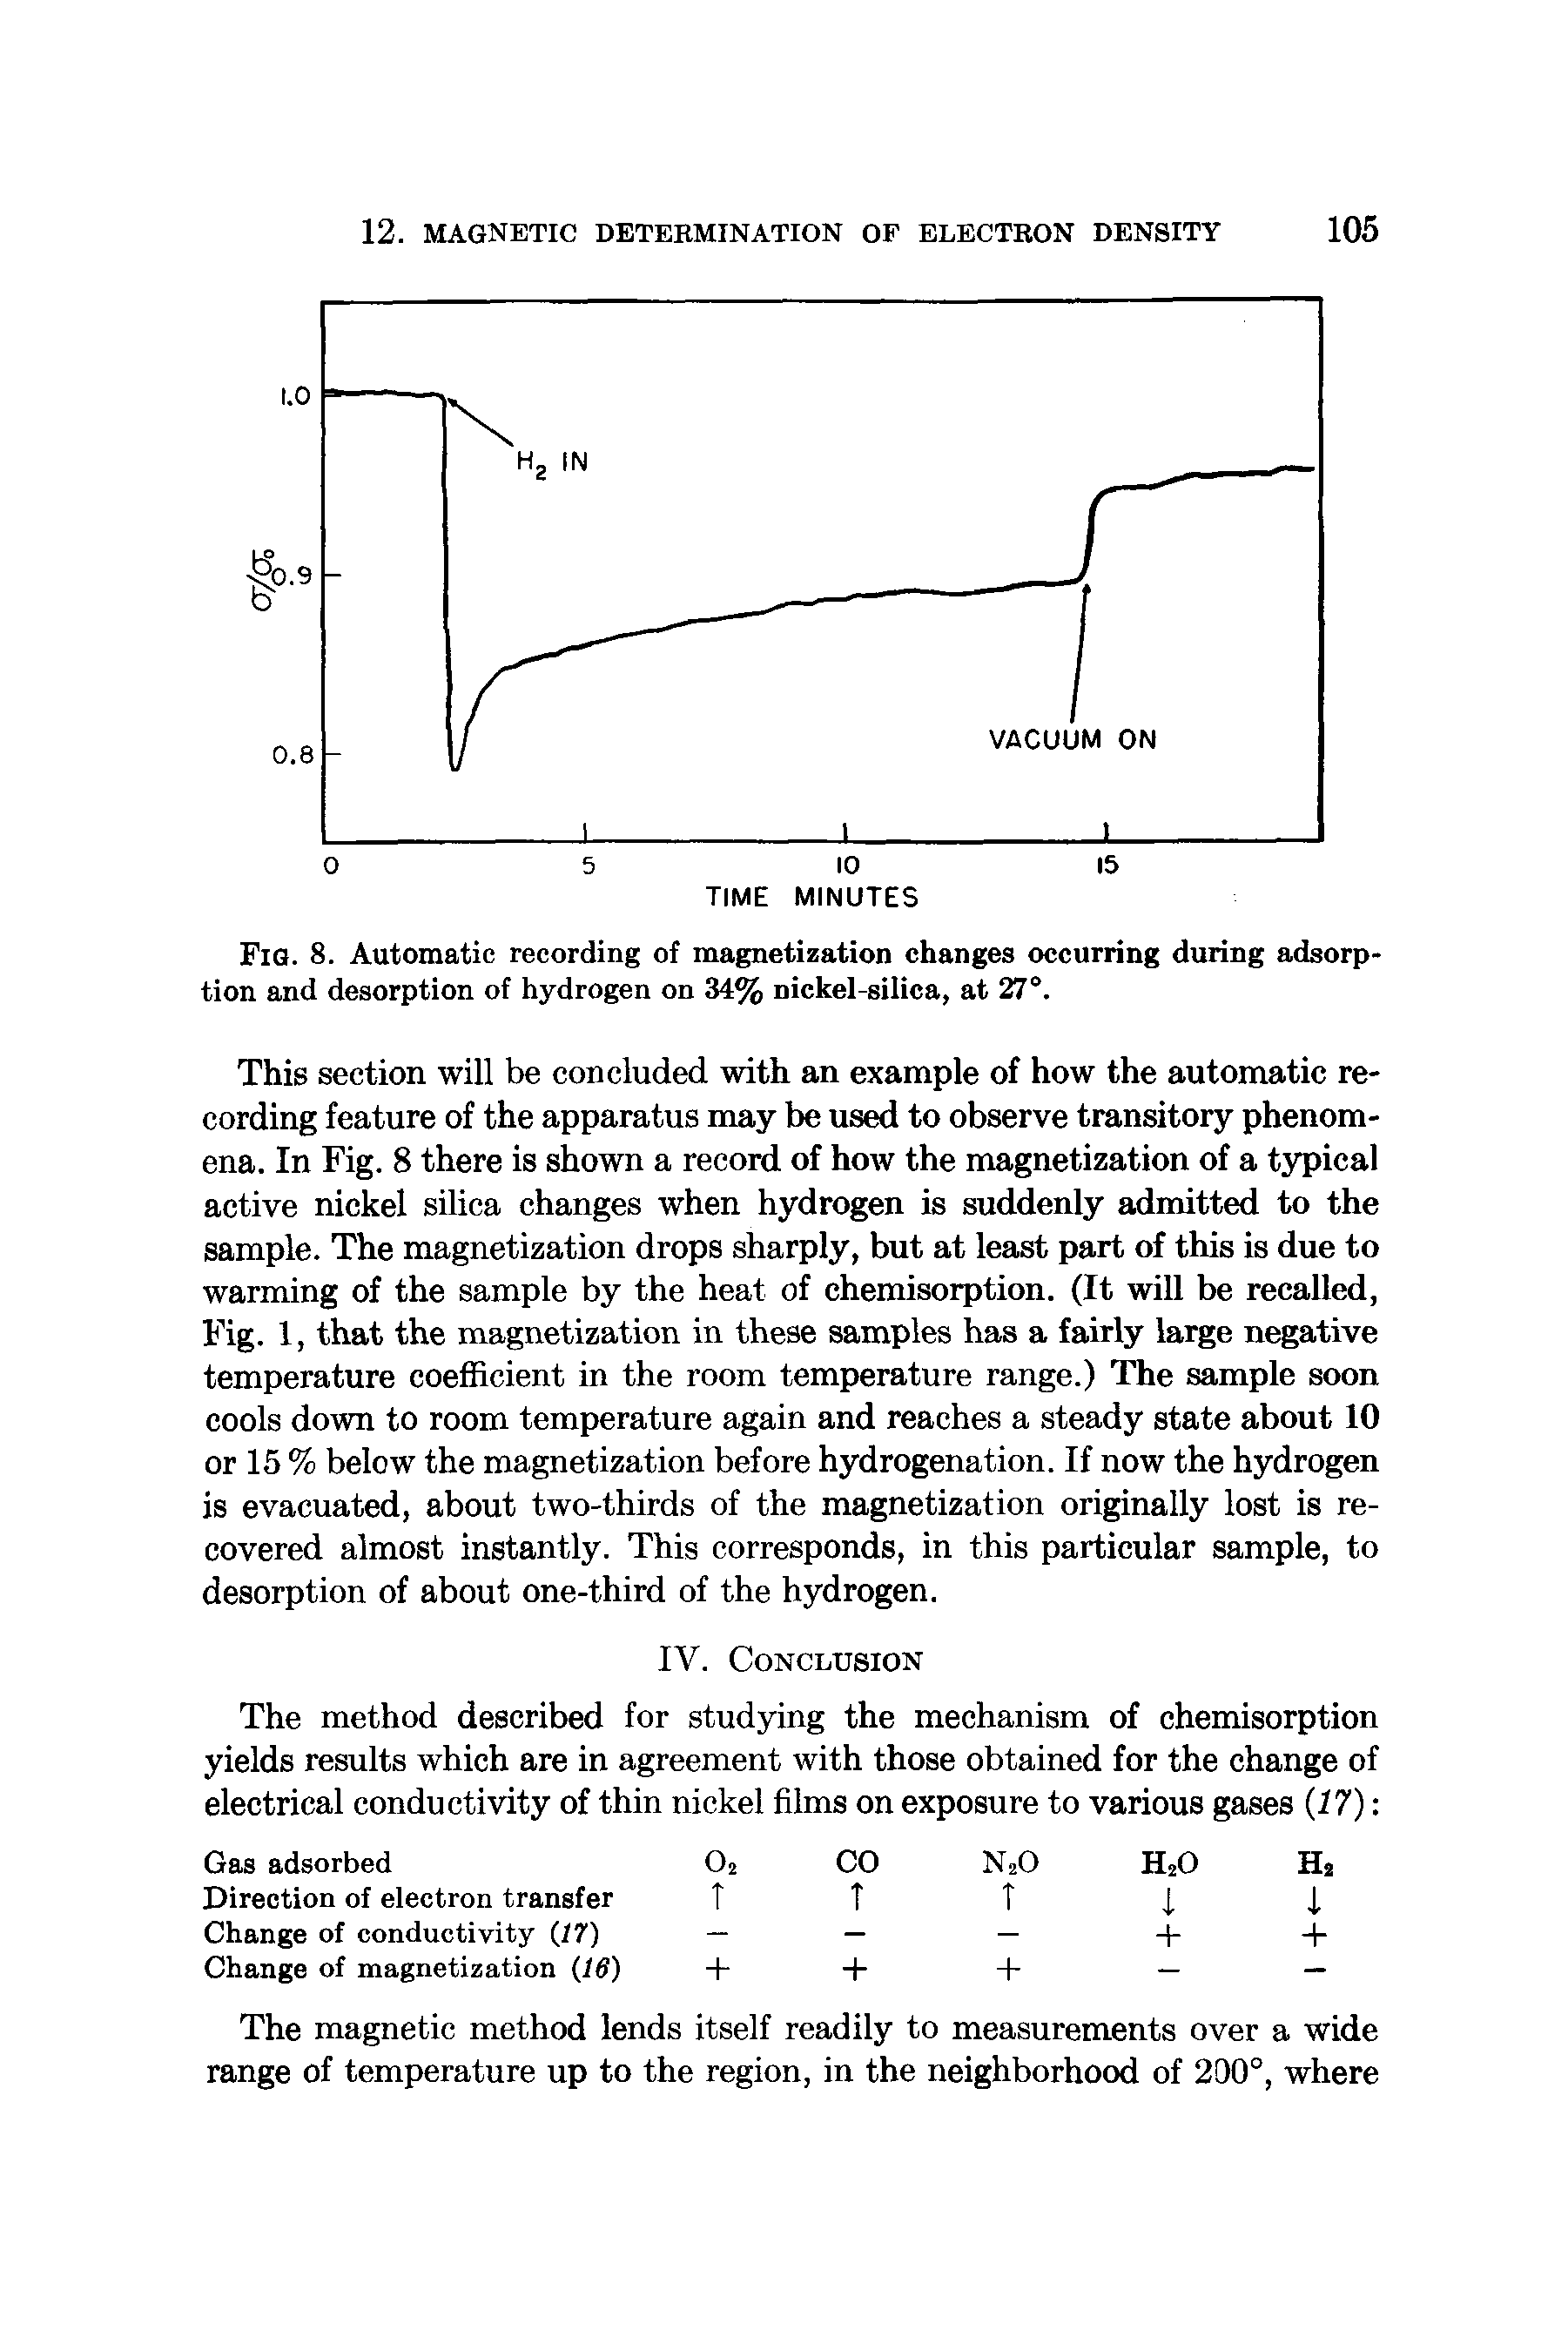 Fig. 8. Automatic recording of magnetization changes occurring during adsorption and desorption of hydrogen on 34% nickel-silica, at 27°.